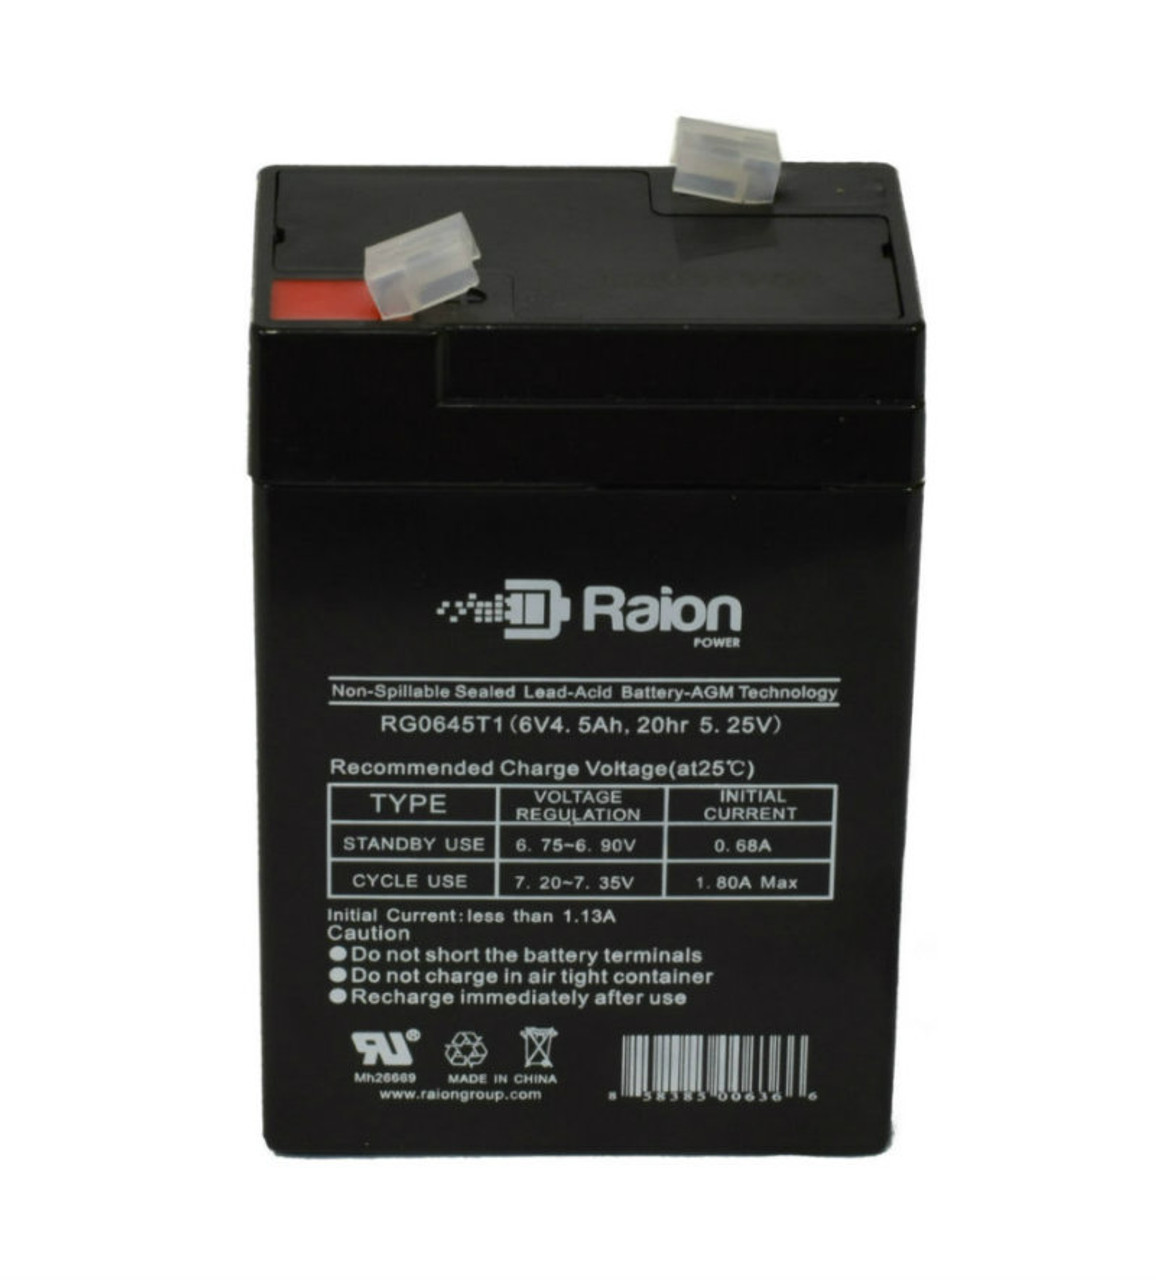 Raion Power RG0645T1 Replacement Battery Cartridge for Alaris Medical Intell Pump 522